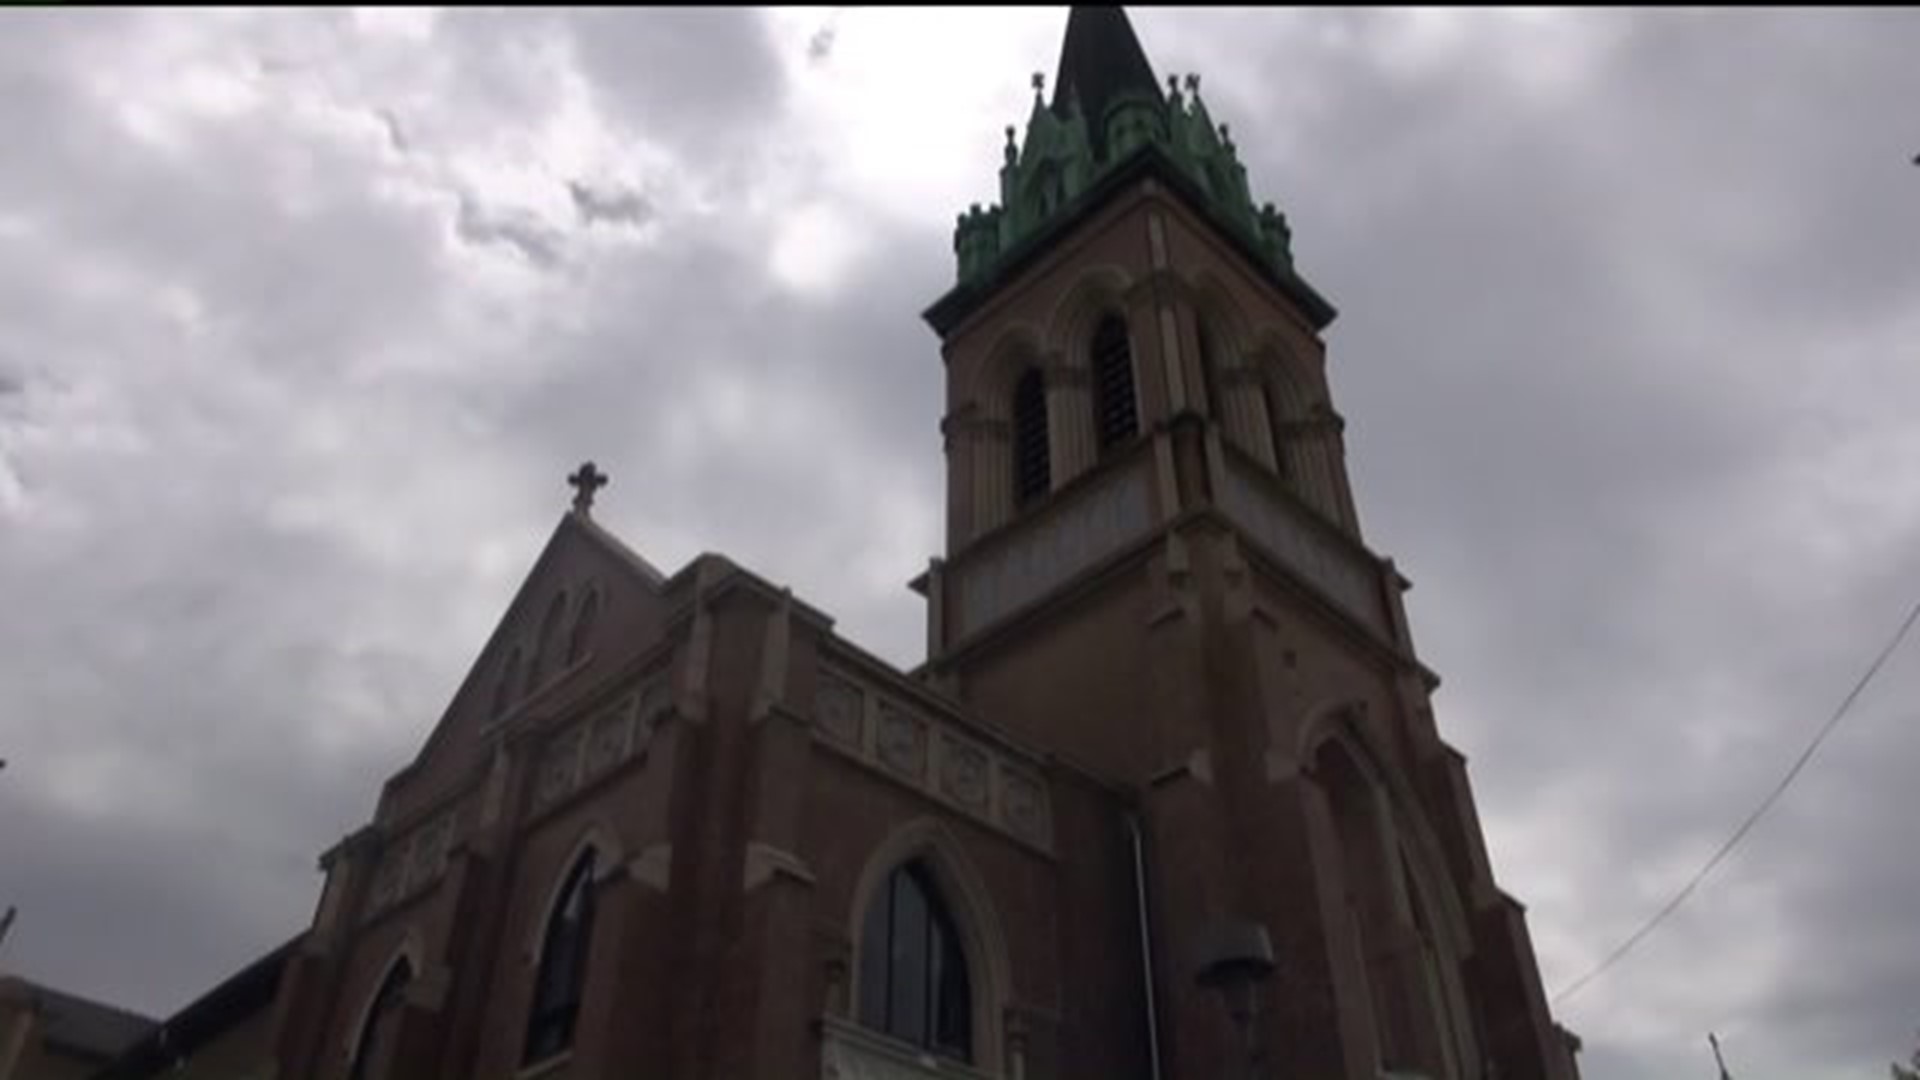 Wilkes-Barre Church Property Converting Into Apartments